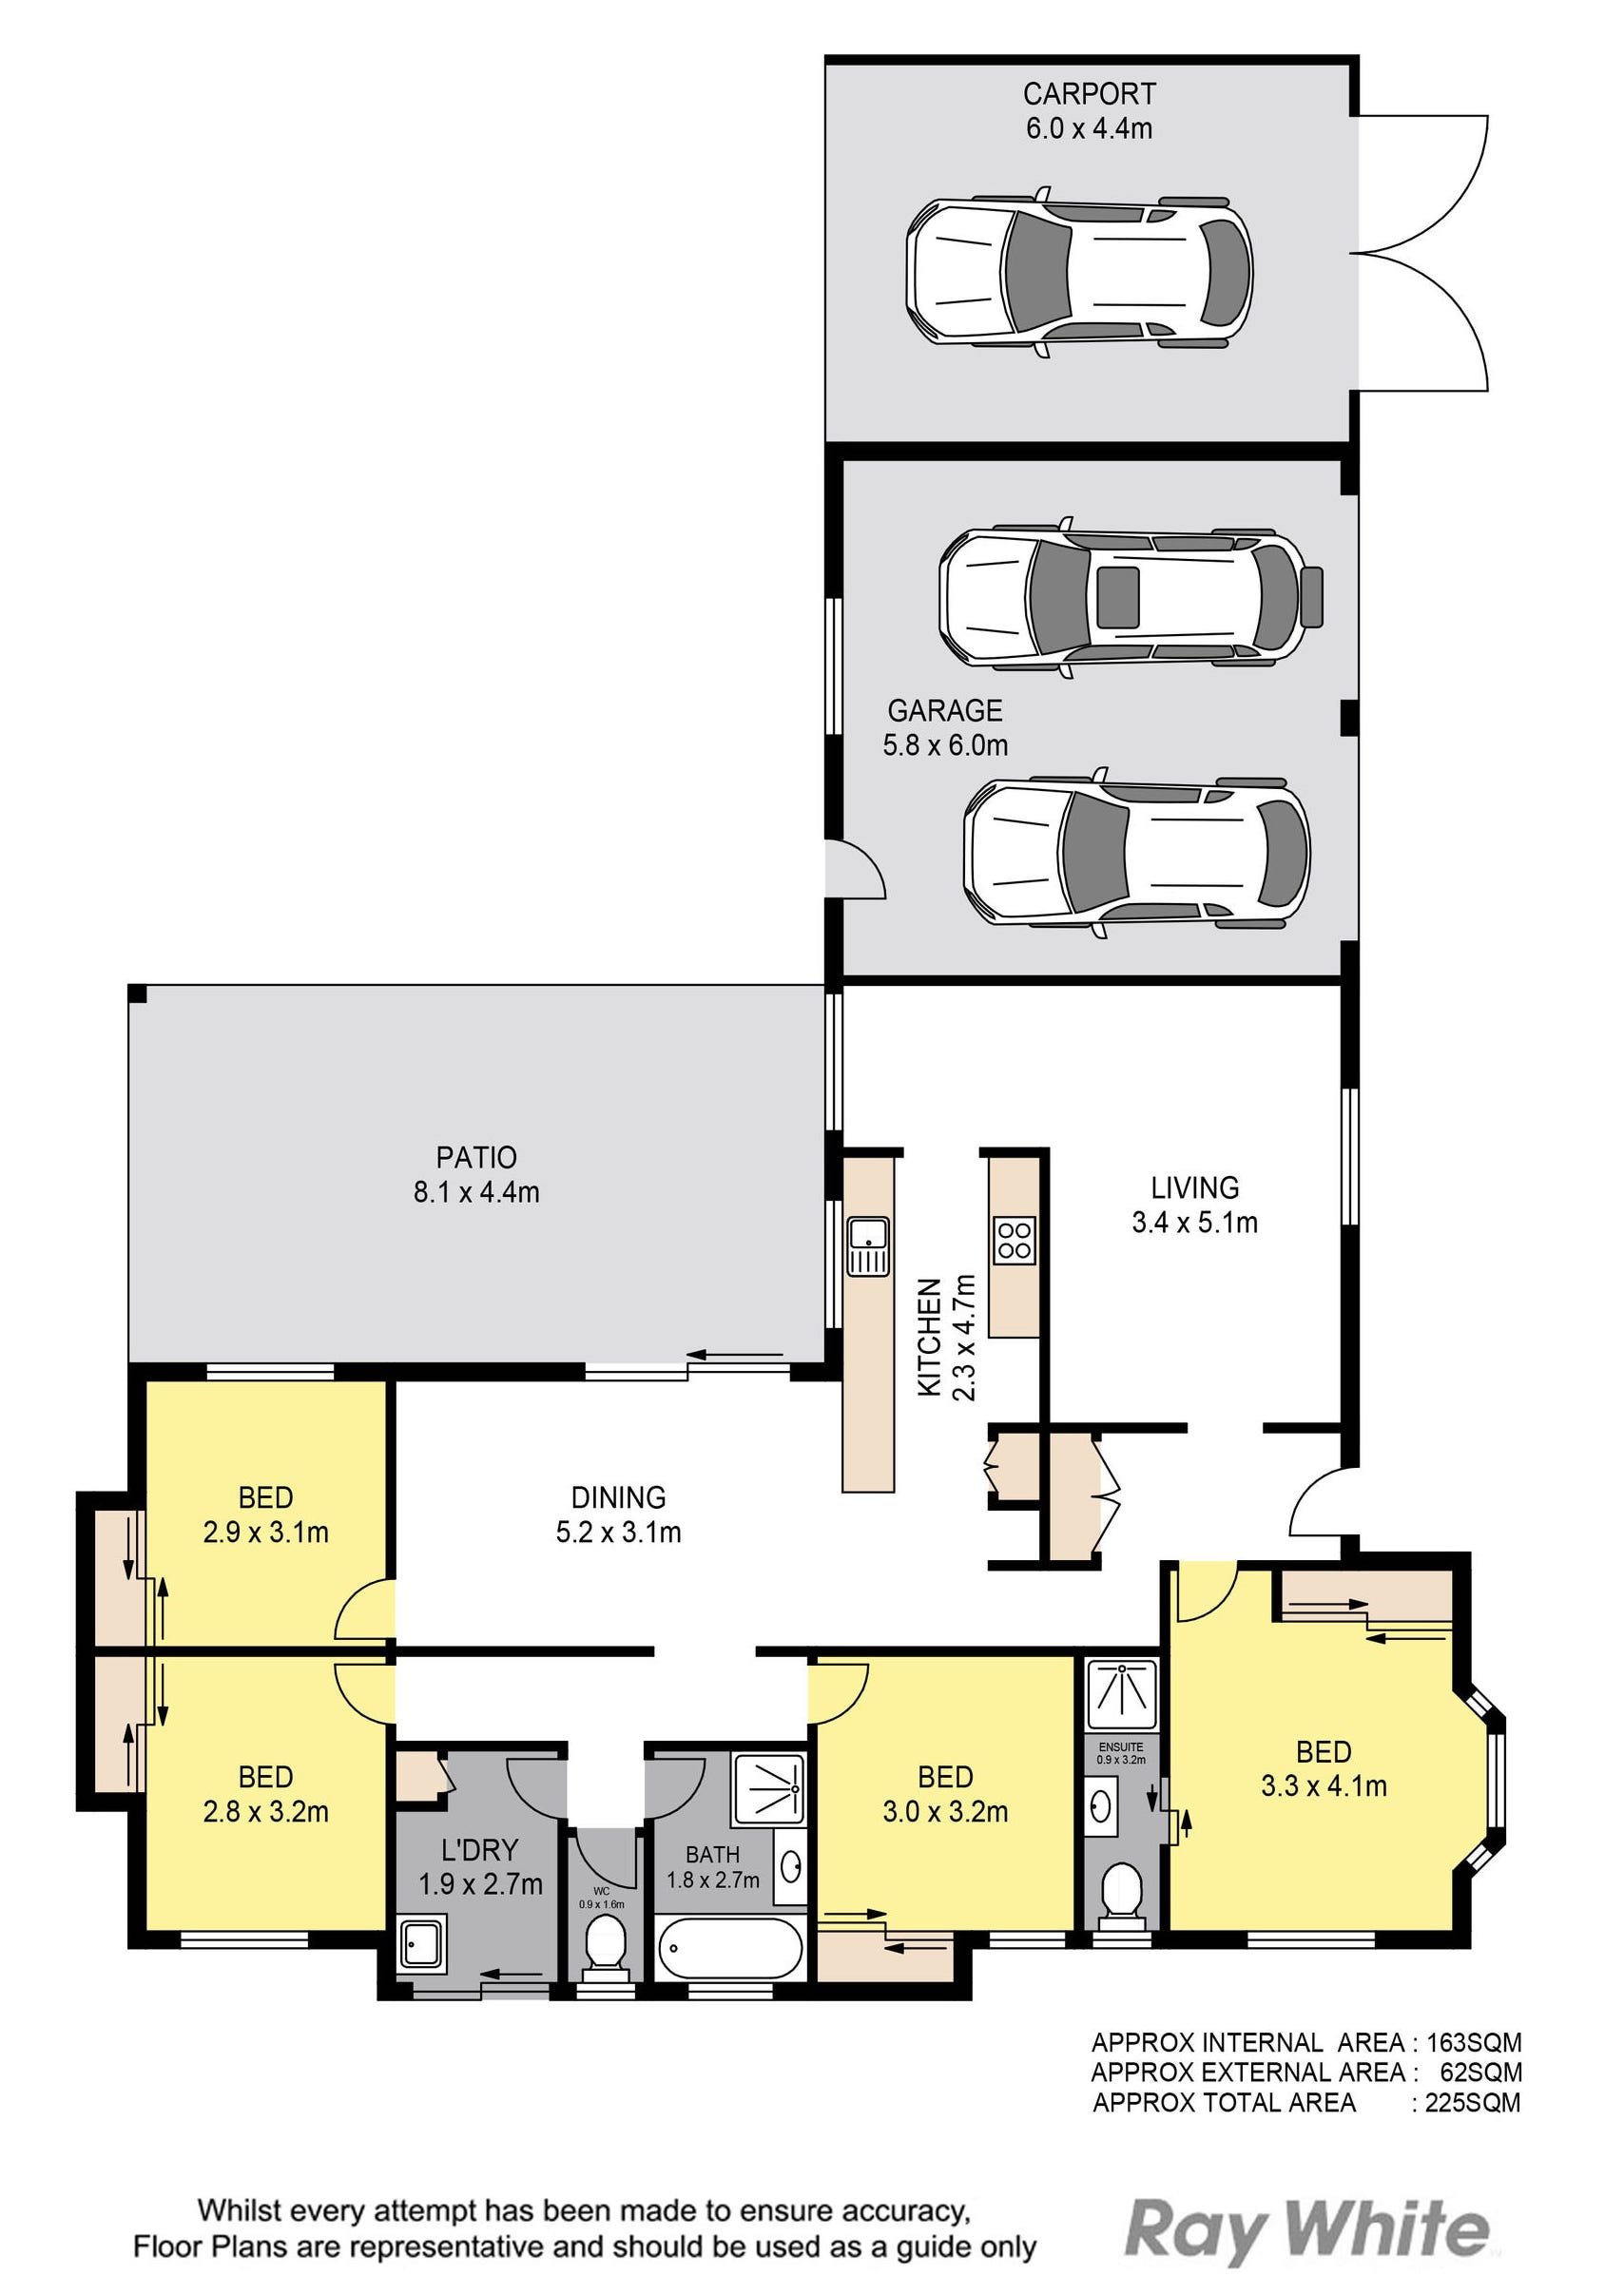 8 Whitby st Hot Property Buyers Agency floor plan.jpeg